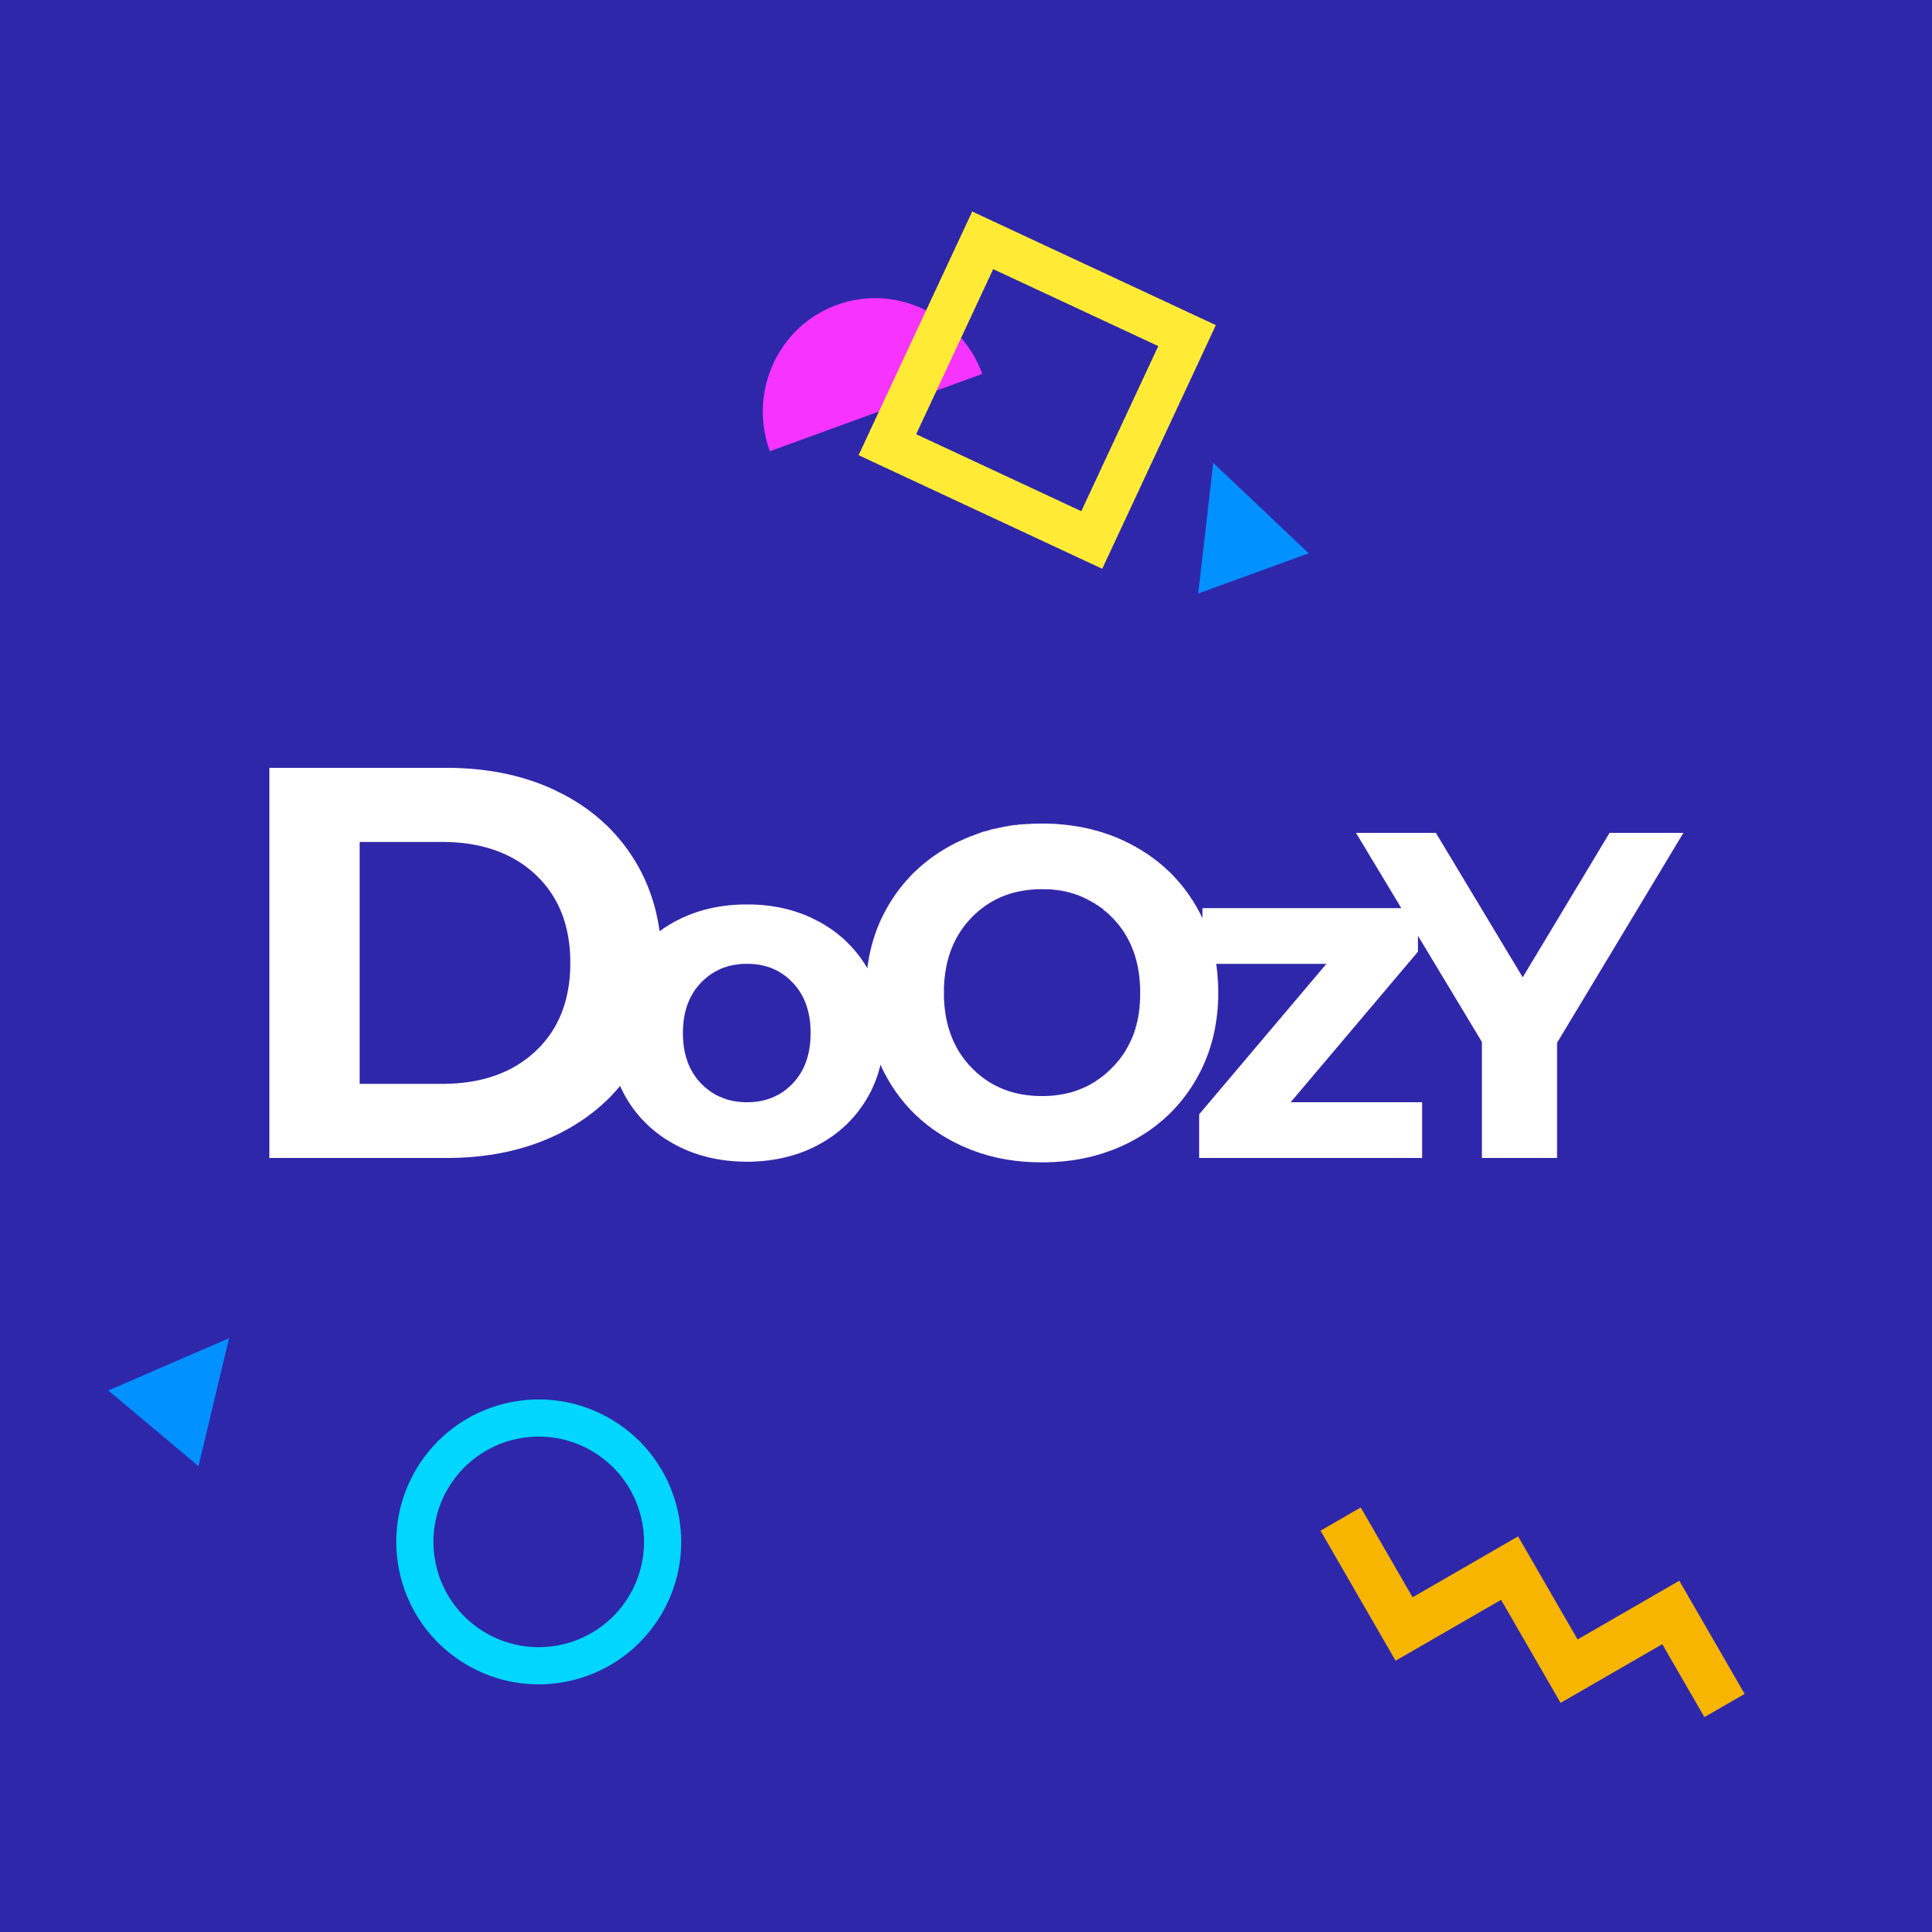 Doozy - The employee engagement platform for remote teams